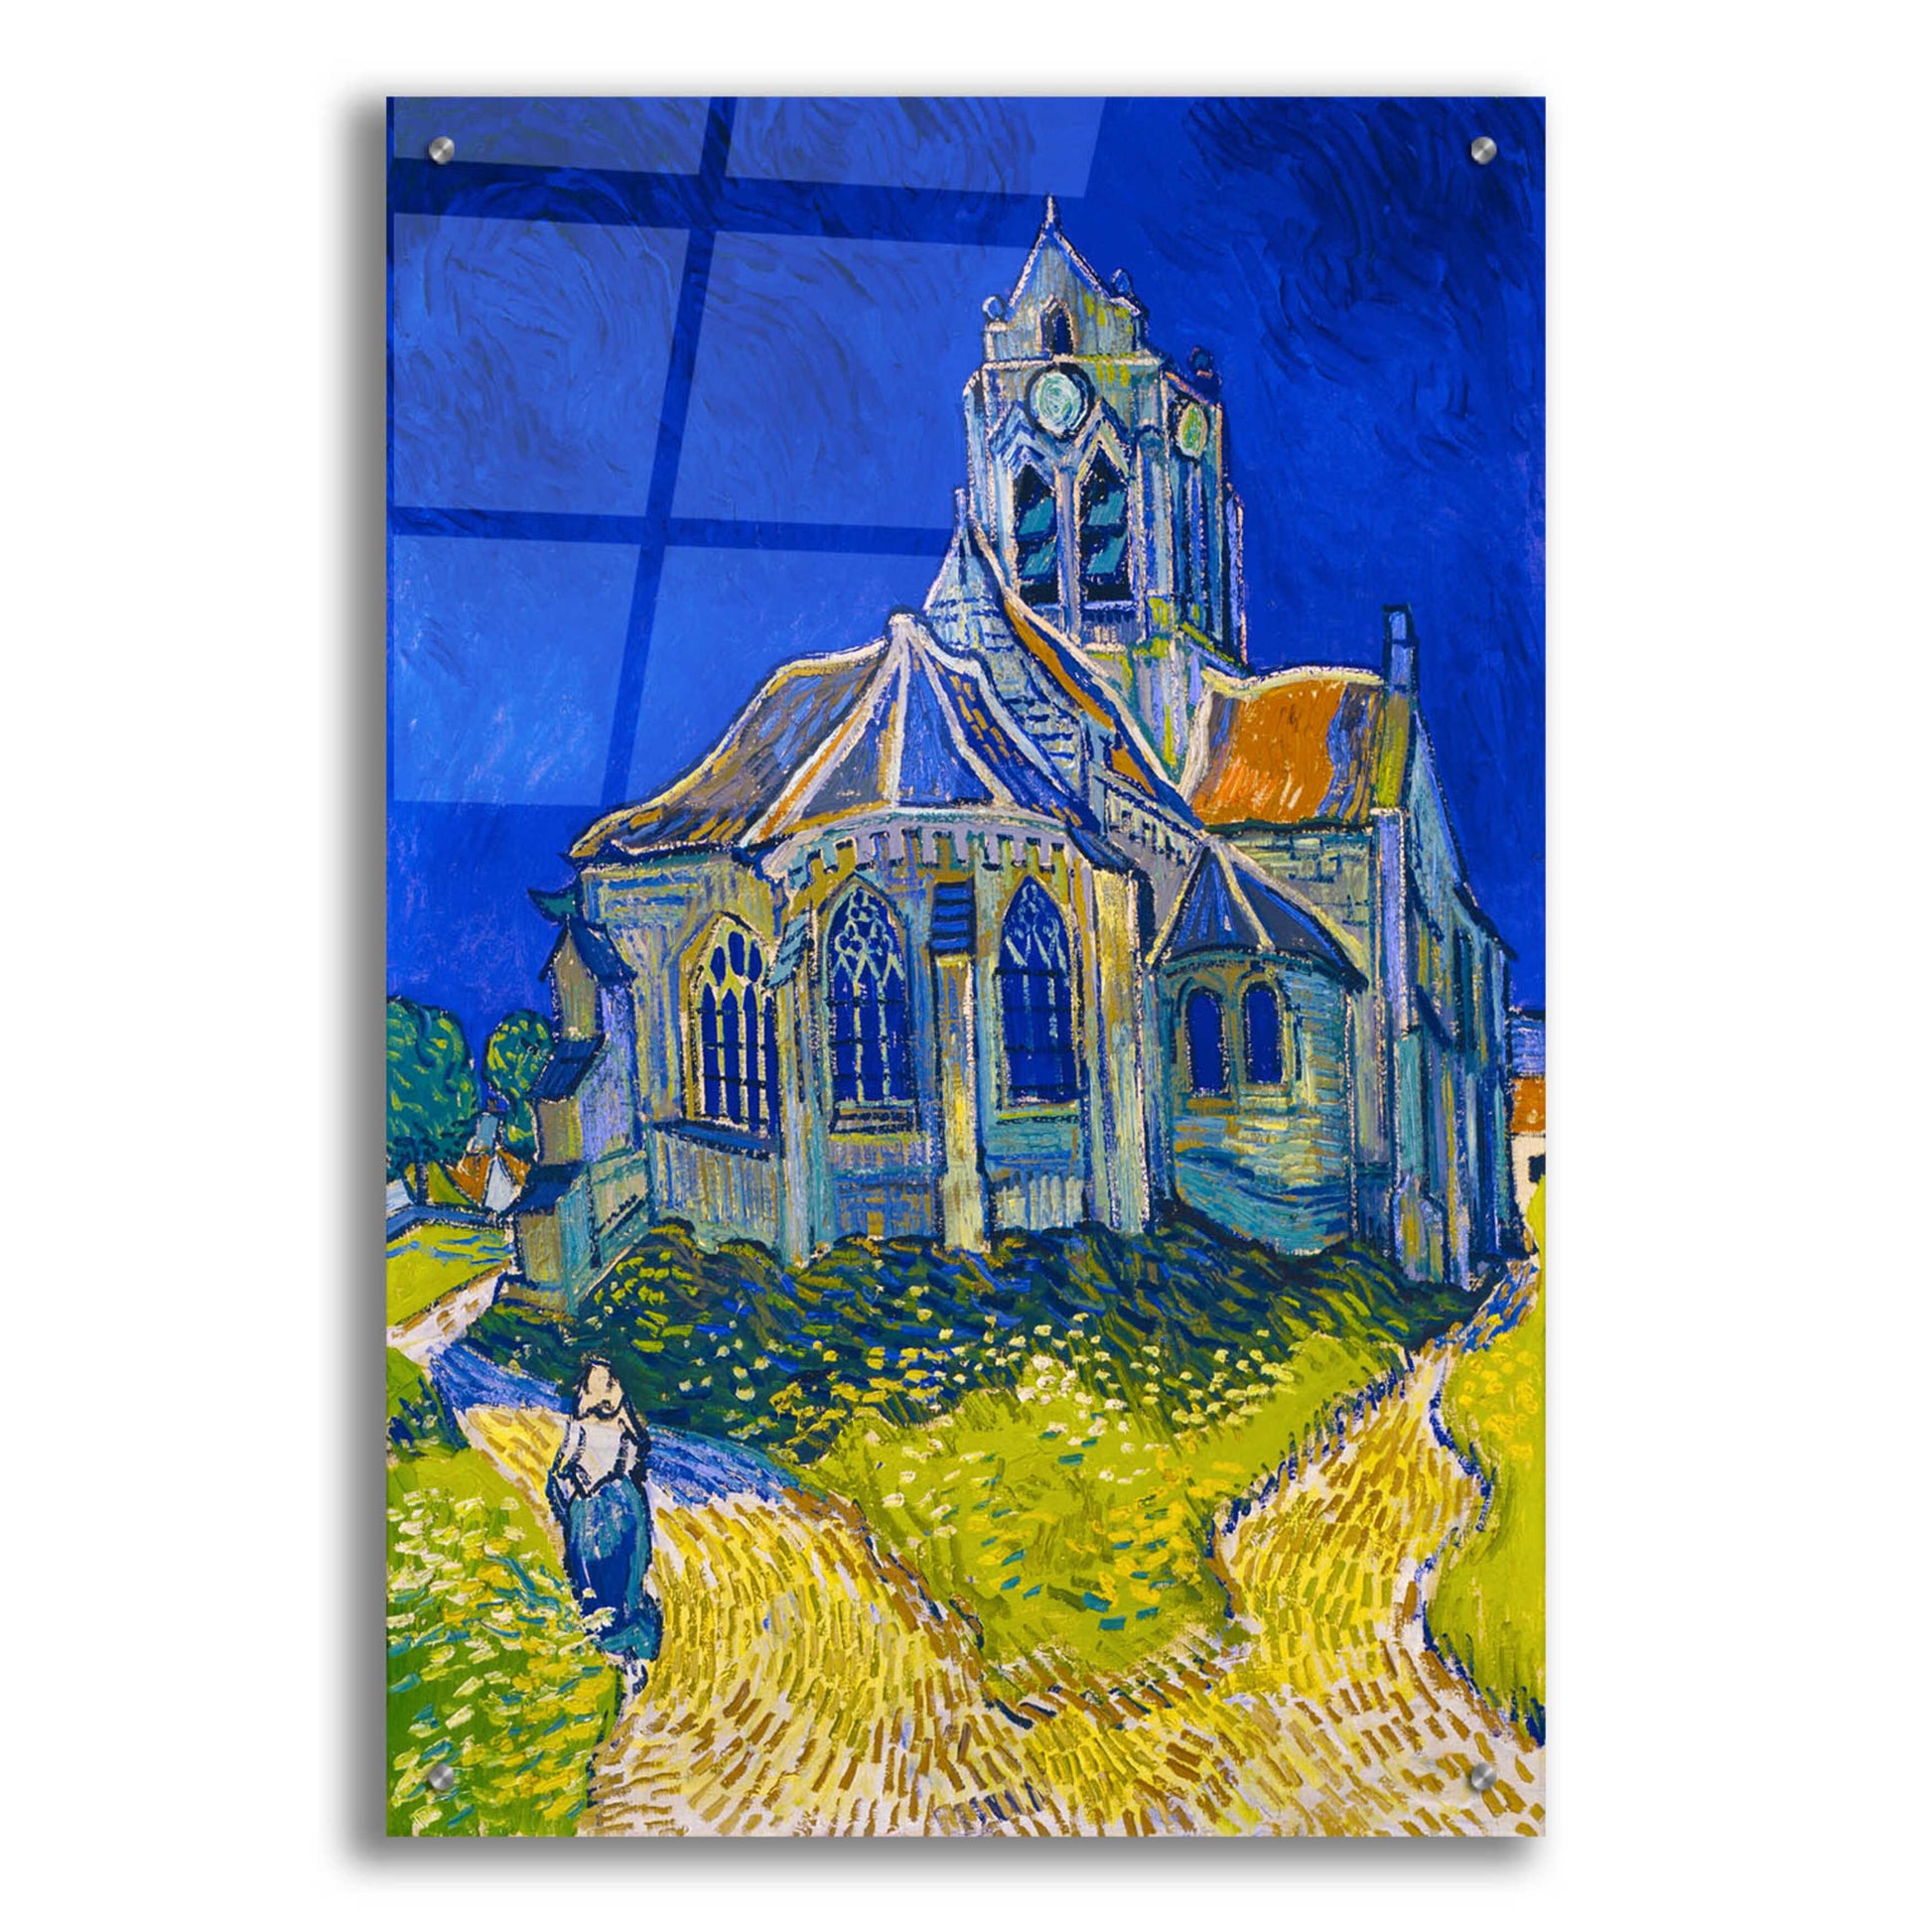 Epic Art 'The Church In Auvers-Sur-Oise, View From The Chevet' by Vincent Van Gogh, Acrylic Glass Wall Art,24x36